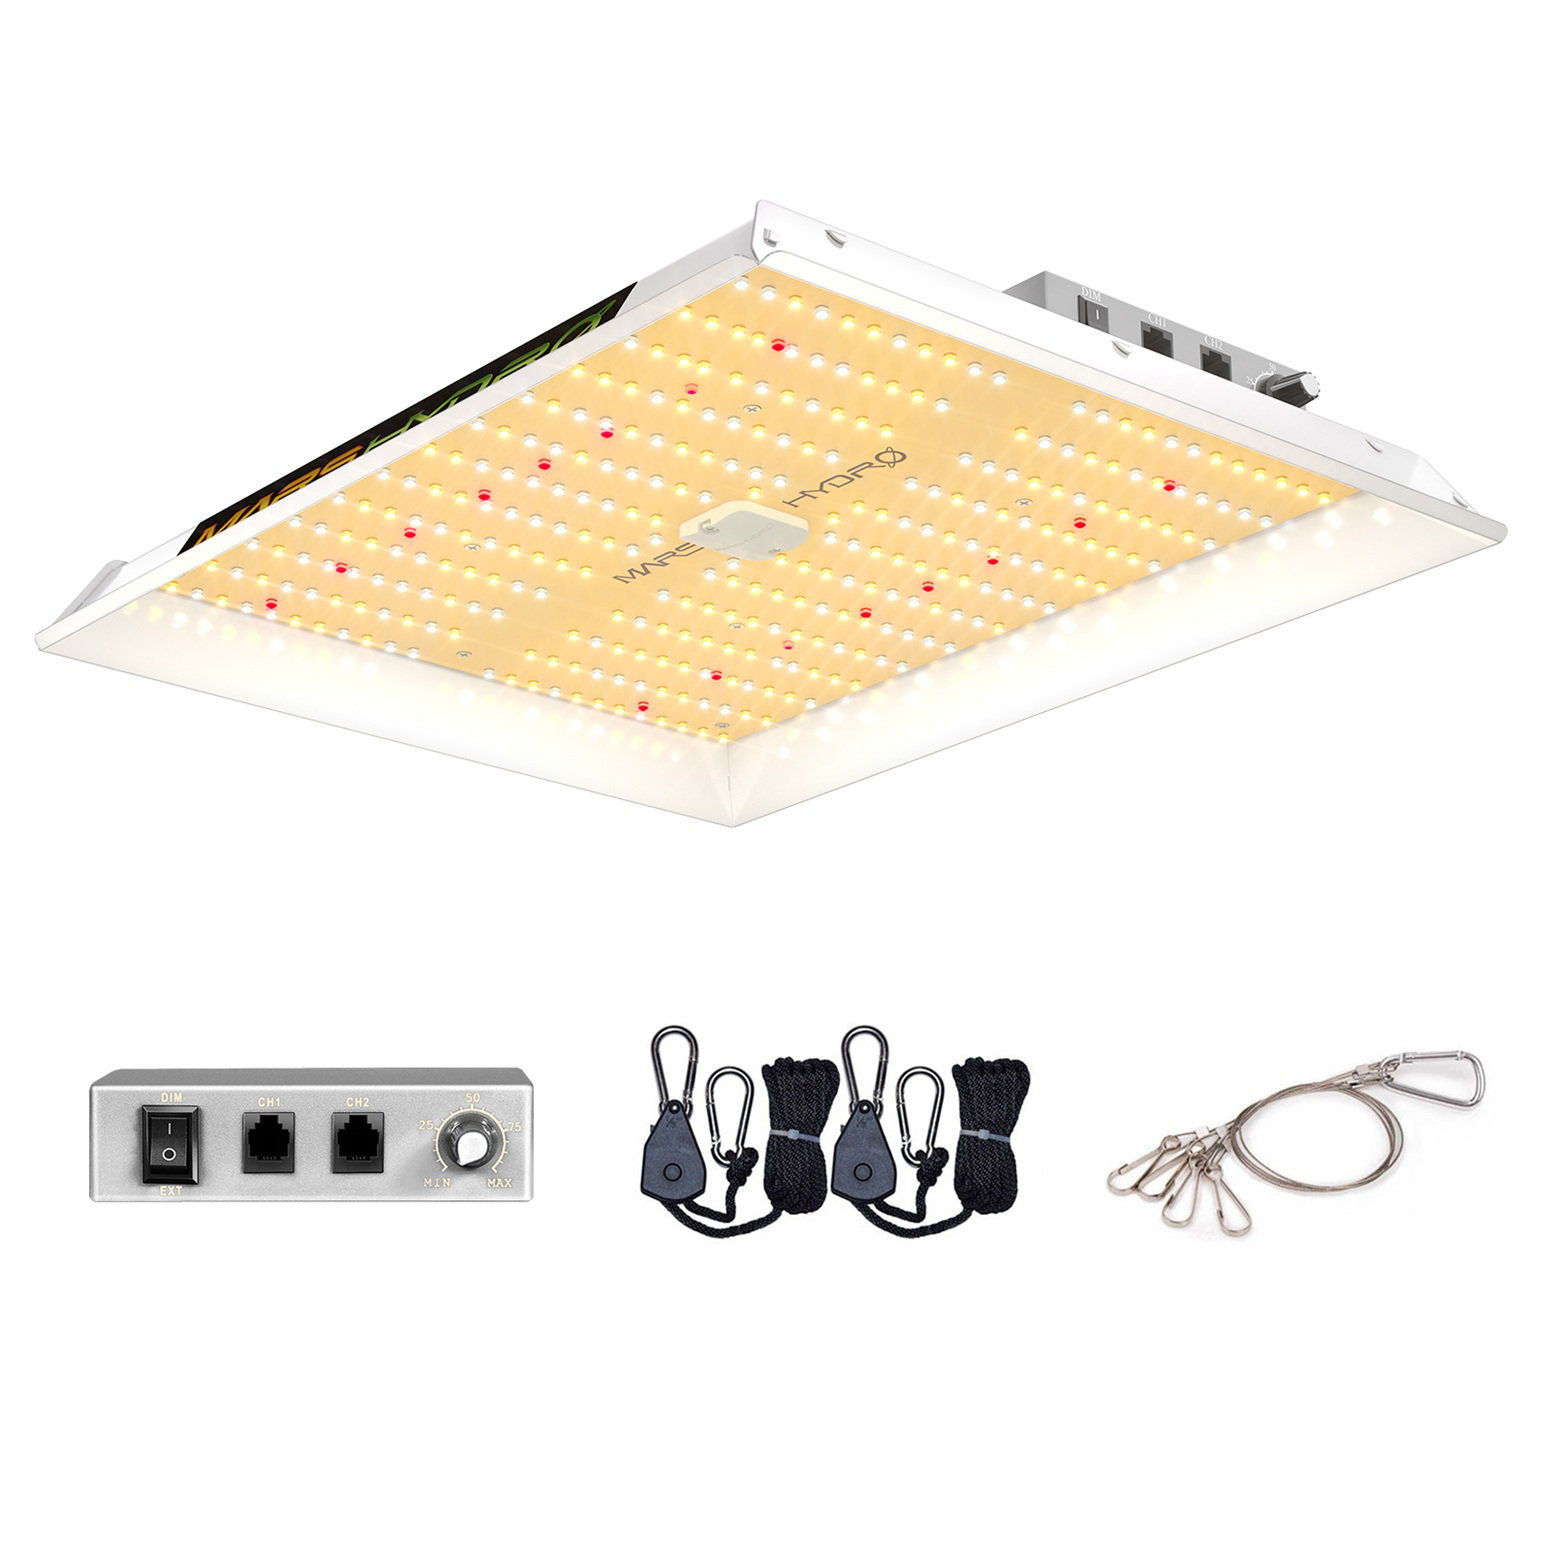 Details about   1000W LED Grow Light for Indoor Plant Full Spectrum Seedling Hydroponics Veg BE 